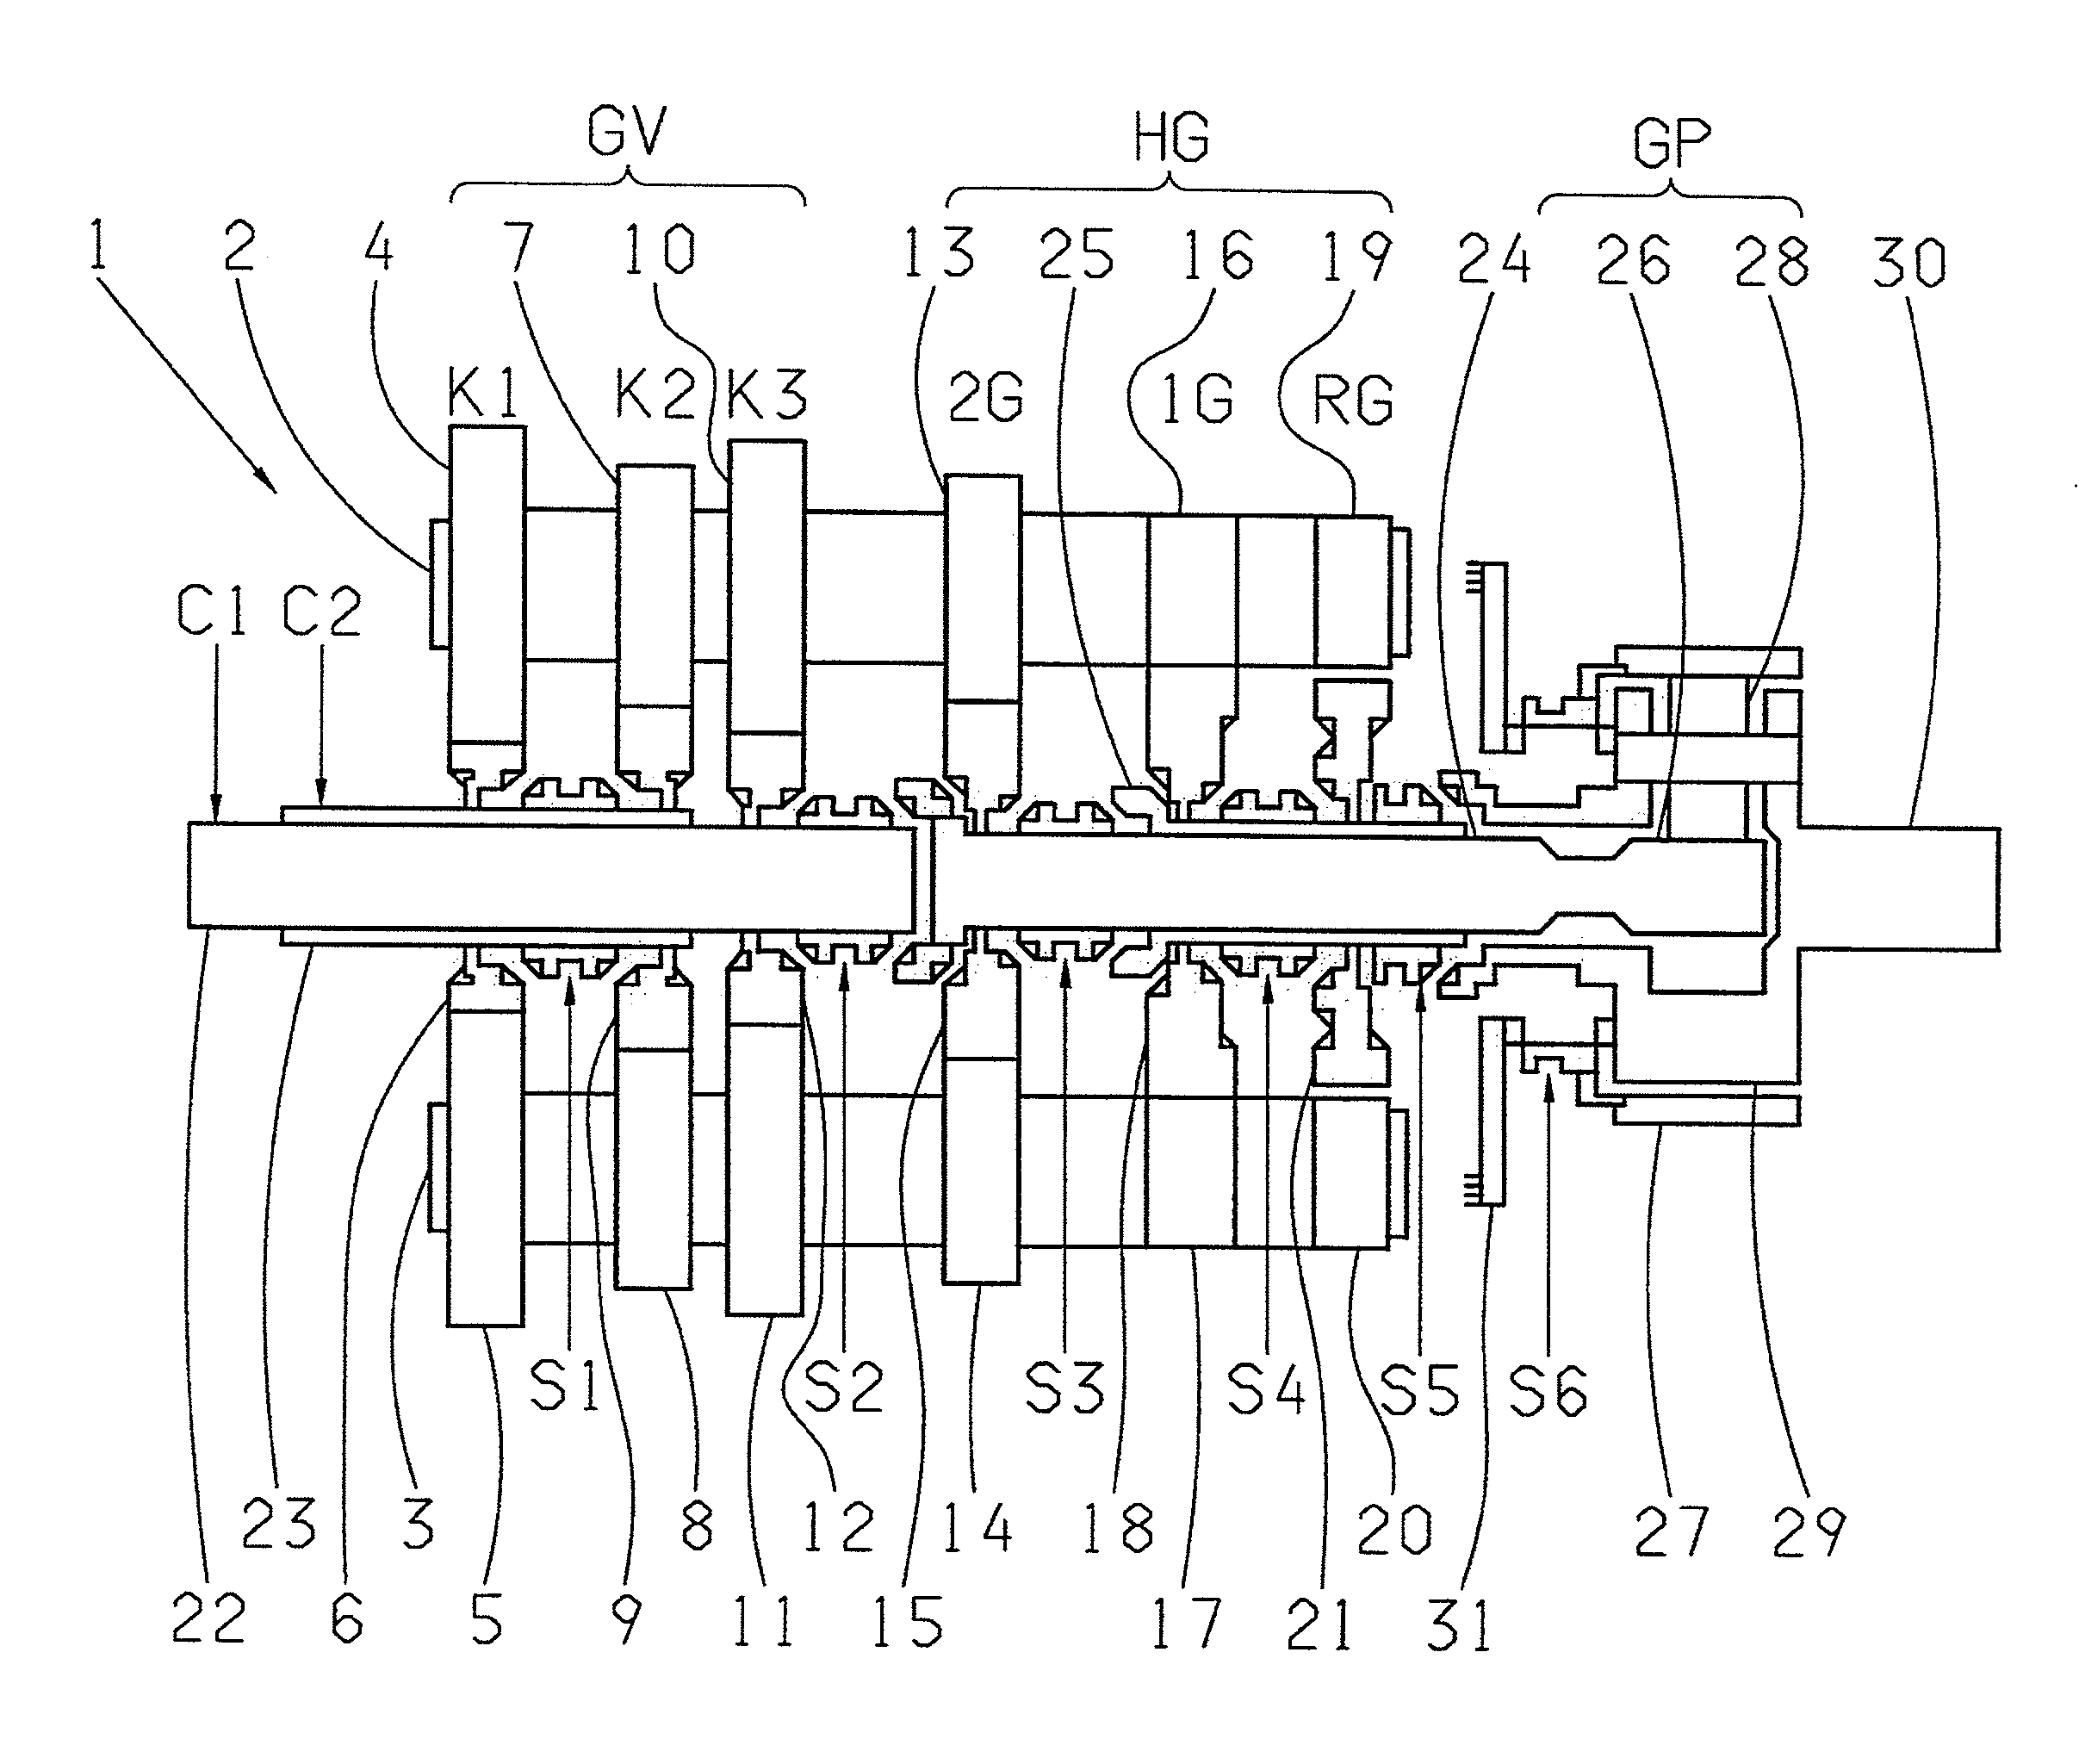 Dual-clutch group transmission and method for actuating a dual-clutch group transmission